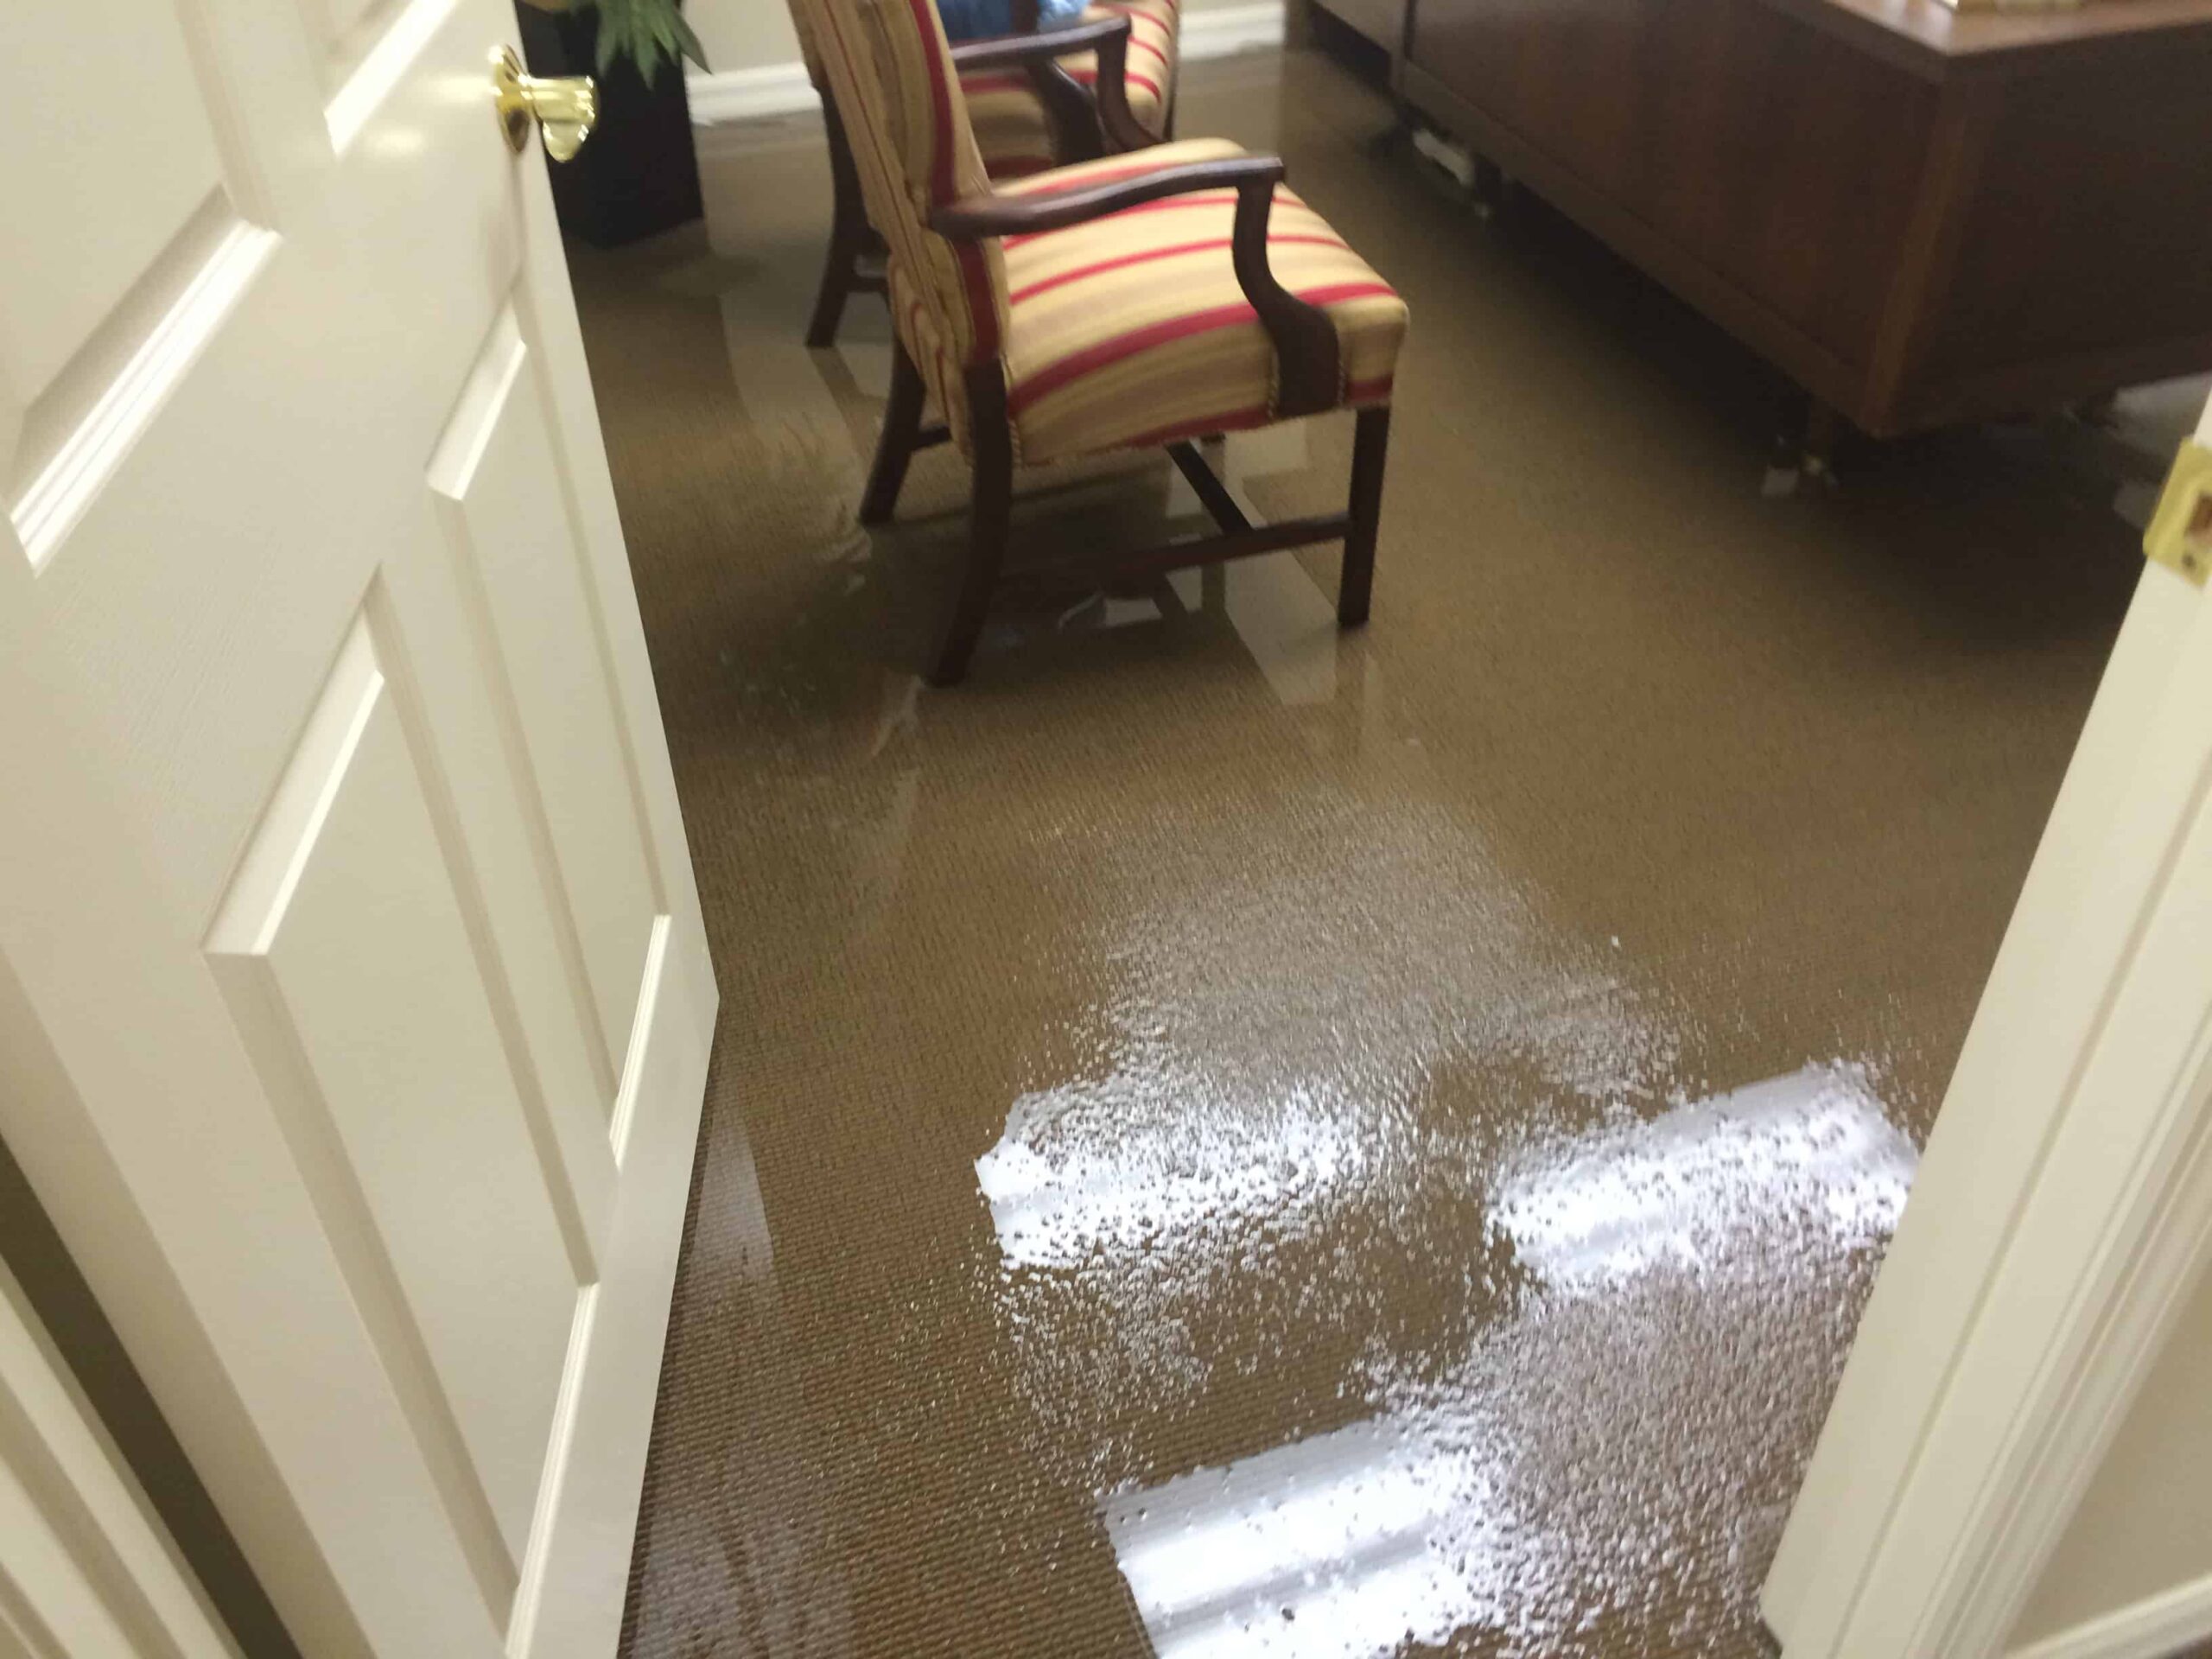 drying out water damage in an office